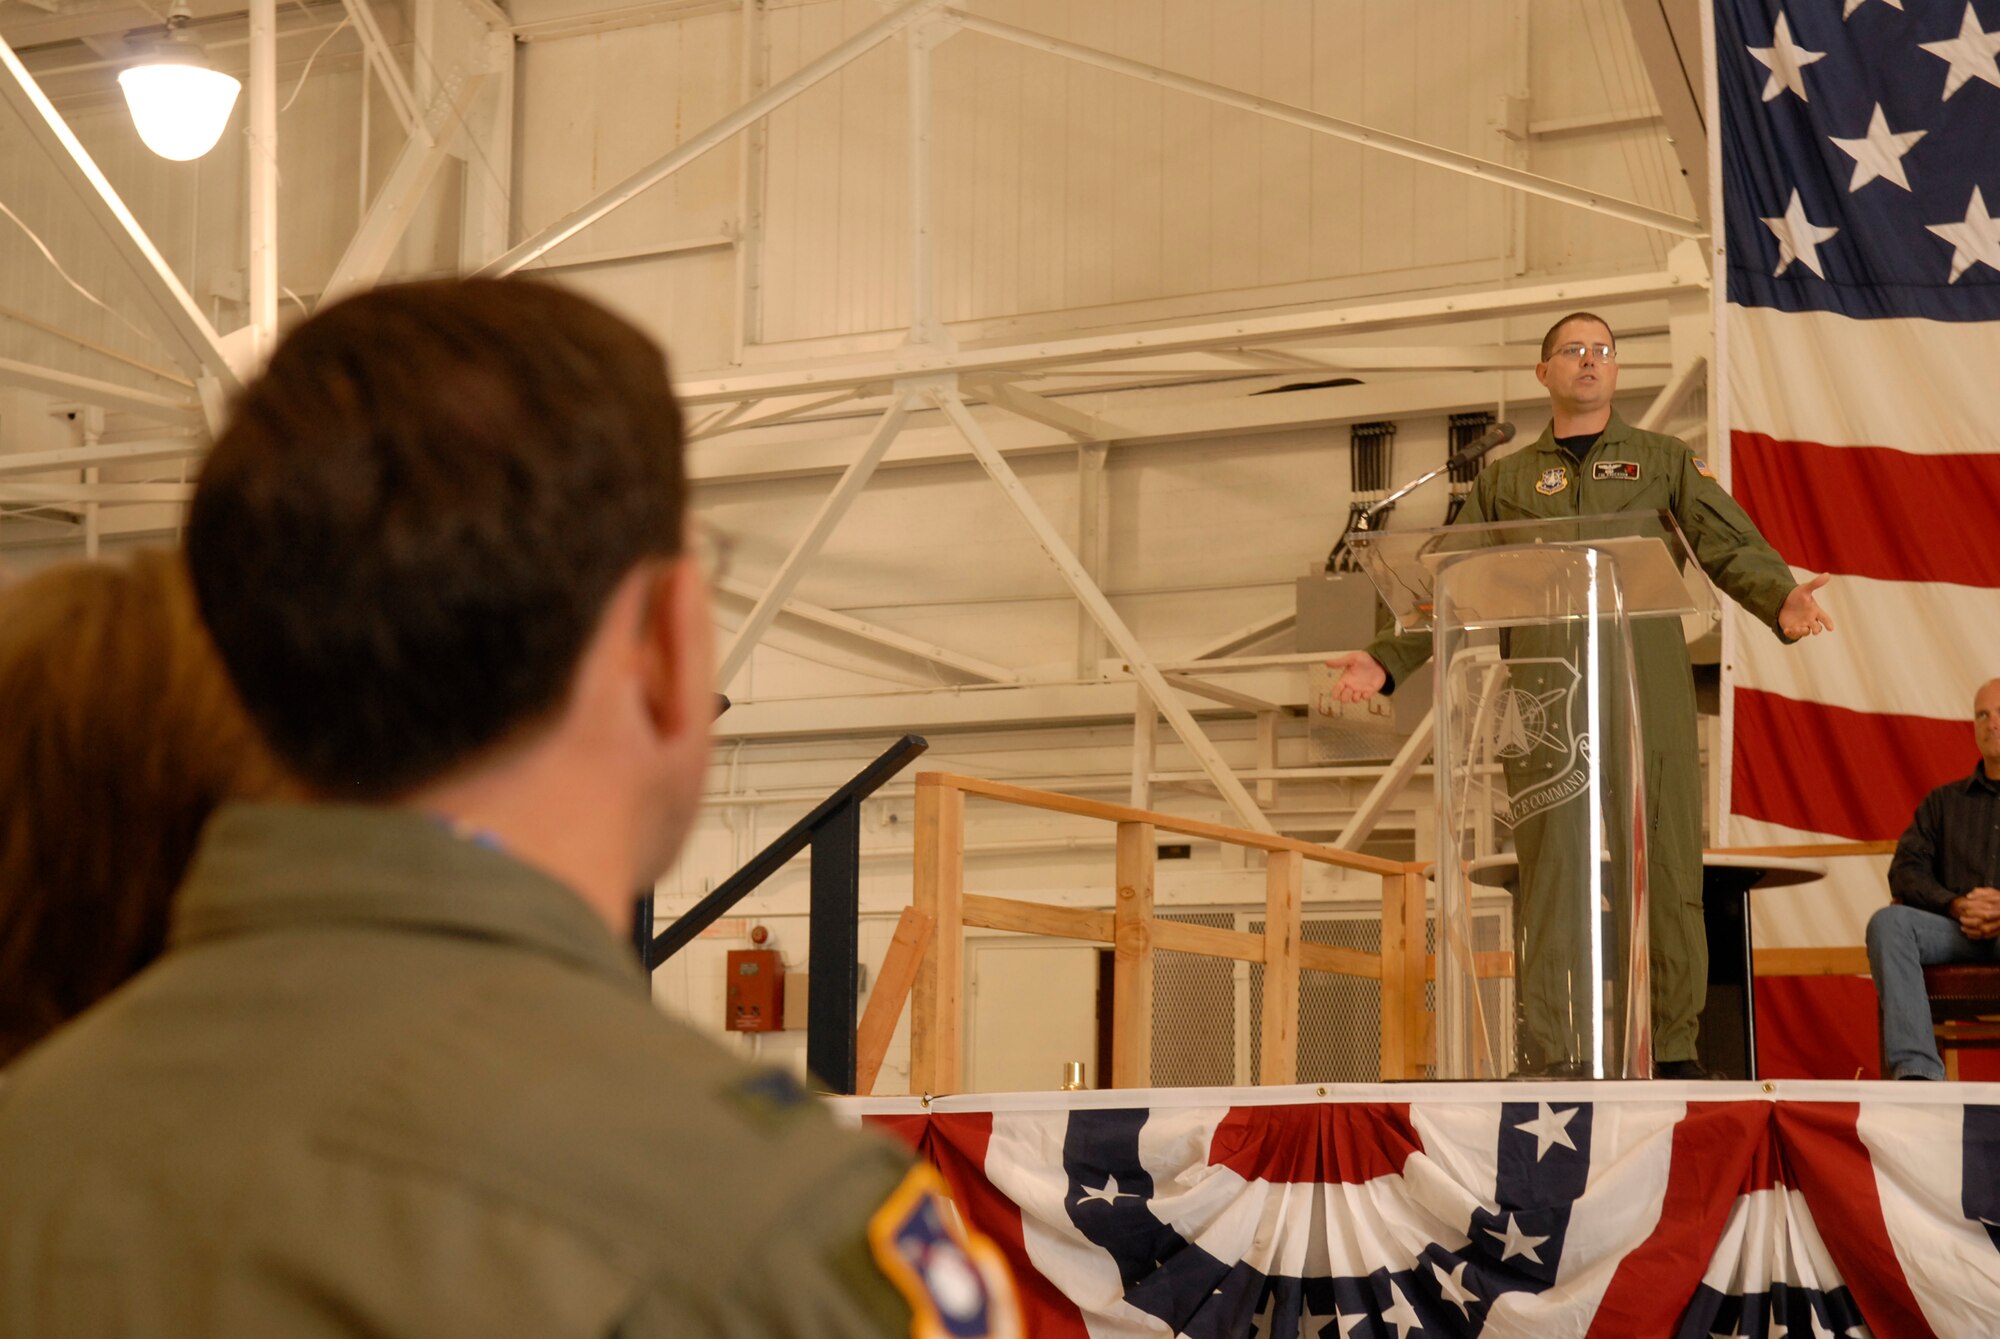 VANDENBERG AIR FORCE BASE, Calif. -- Col. Steve Tanous, 30th Space Wing commander, looks on as Maj.Timothy Anderson, the final commander of the 76th Helicopter Squadron, delivers his farewell speech during the inactivation ceremony for the 76th Helicopter Squadron at the hangar on Aug. 2.  The squadron supported space launch, land and water rescue, fire suppression and many diverse training missions. Launch security will continue to be maintained by the 30th Security Forces Squadron through the unmanned aerial vehicle program.  (U.S. Air Force photo/Airman 1st Class Adam Guy) 